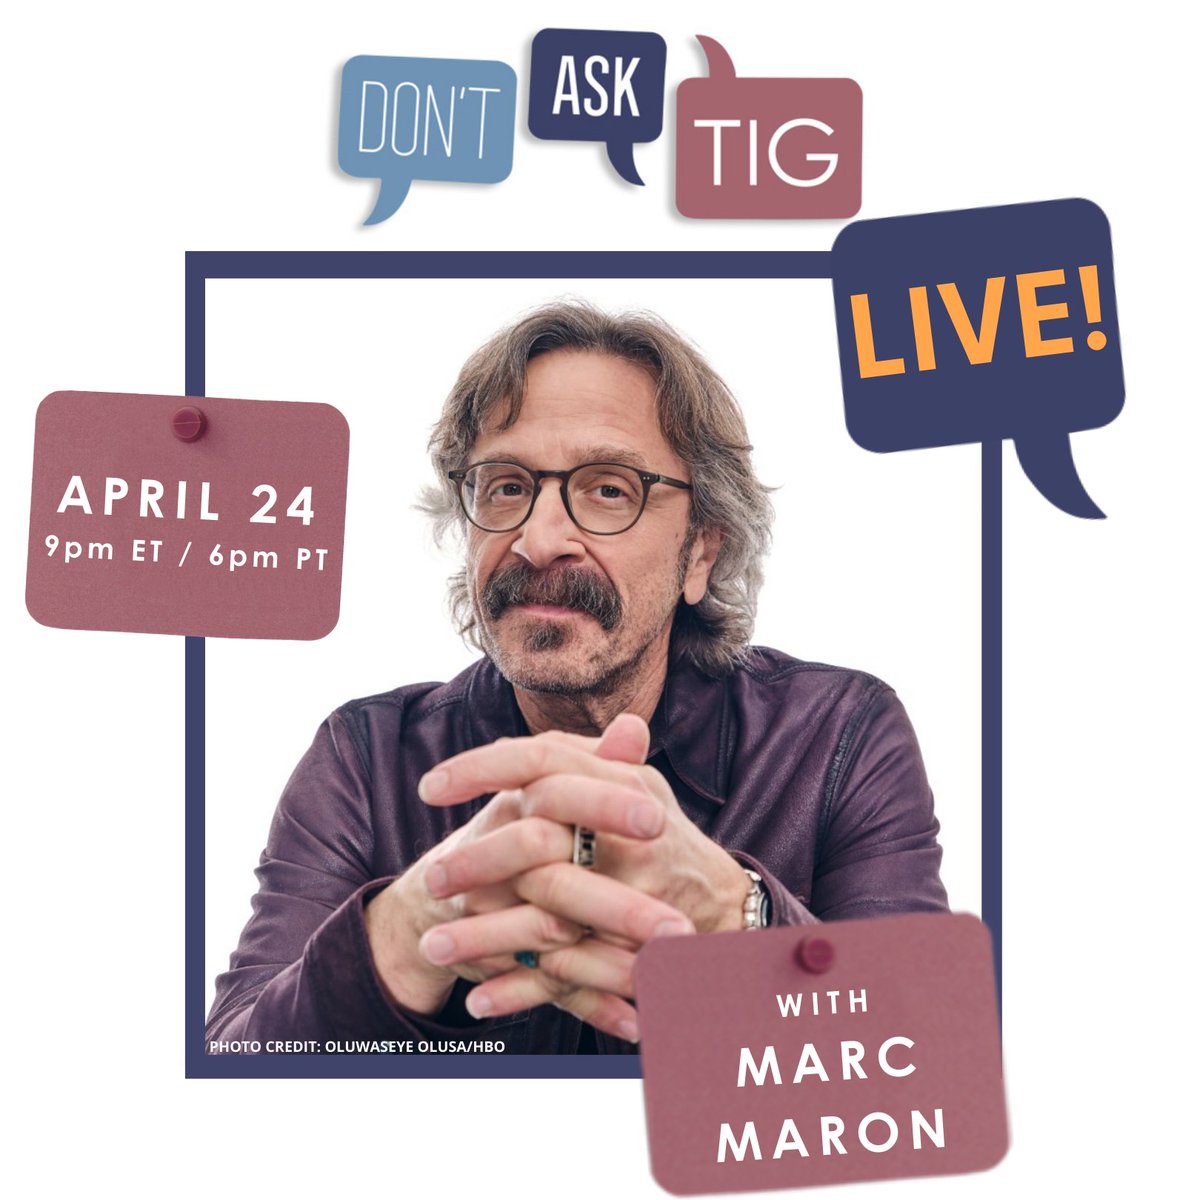 MONDAY! Join @TigNotaro & @marcmaron for a live virtual event on 4/24 at 9pm ET / 6PM PT. Can't make it? Don't worry! The show will be recorded & available to ticket holders for viewing after the event. Reserve your spot today by donating $15 or more at support.americanpublicmedia.org/dontasktig-eve…